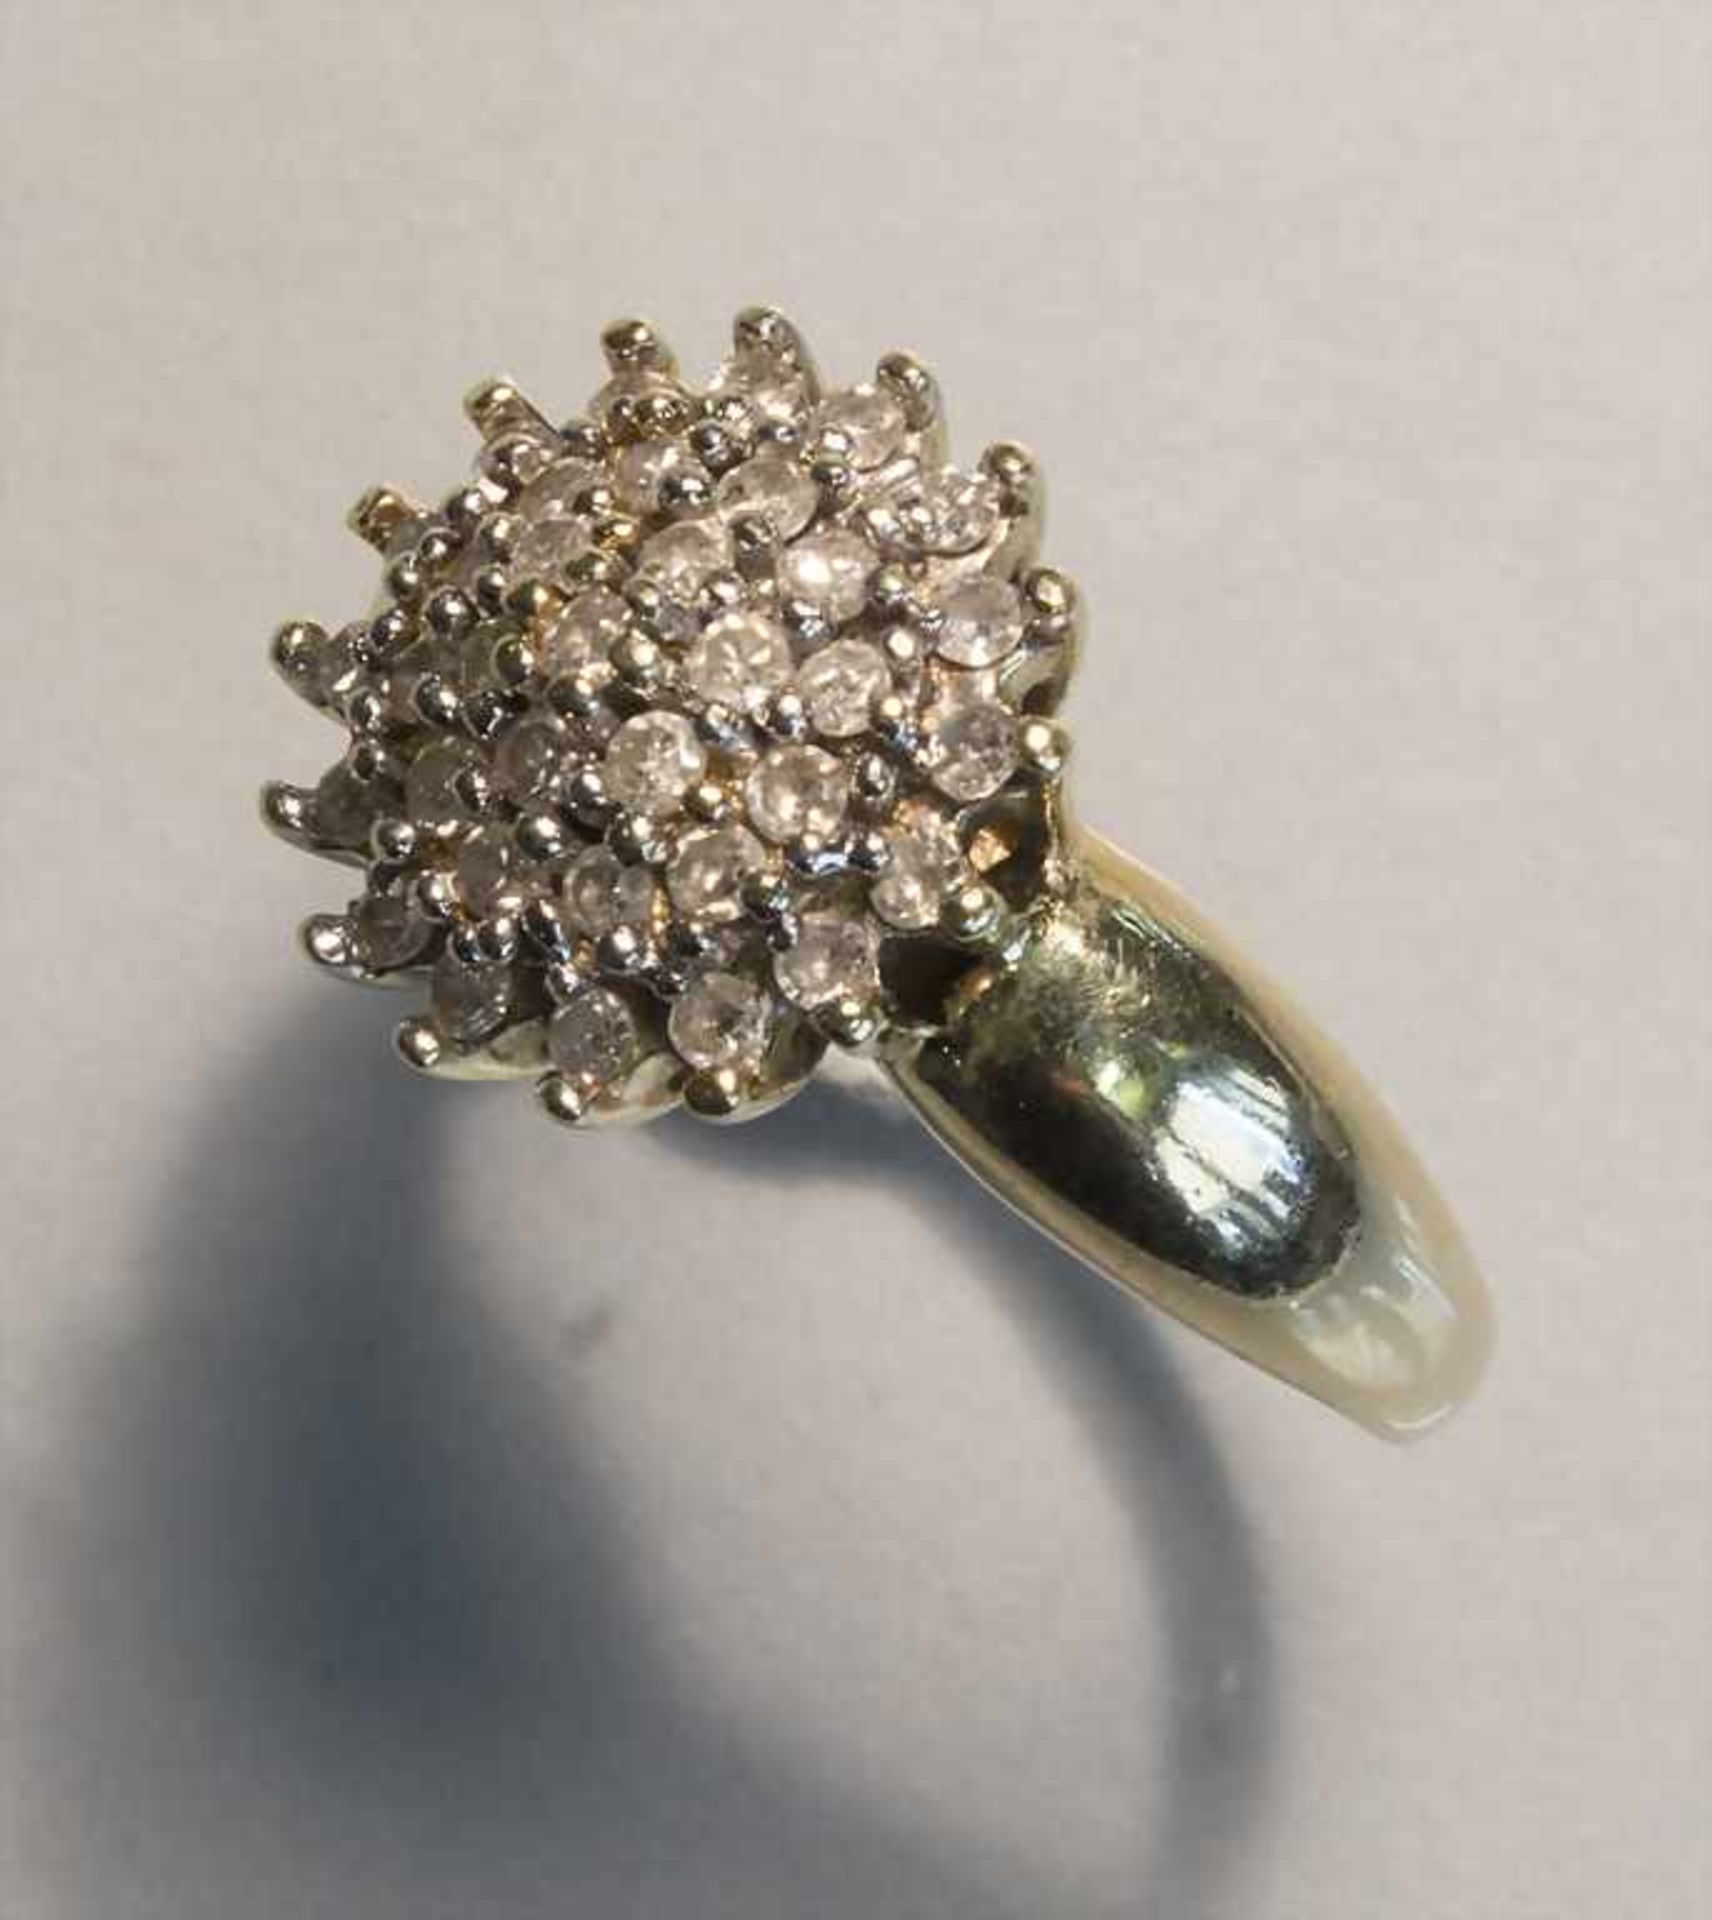 Damenring mit Diamant-Blüte / A ladies ring with a diamond blossom - Image 3 of 4